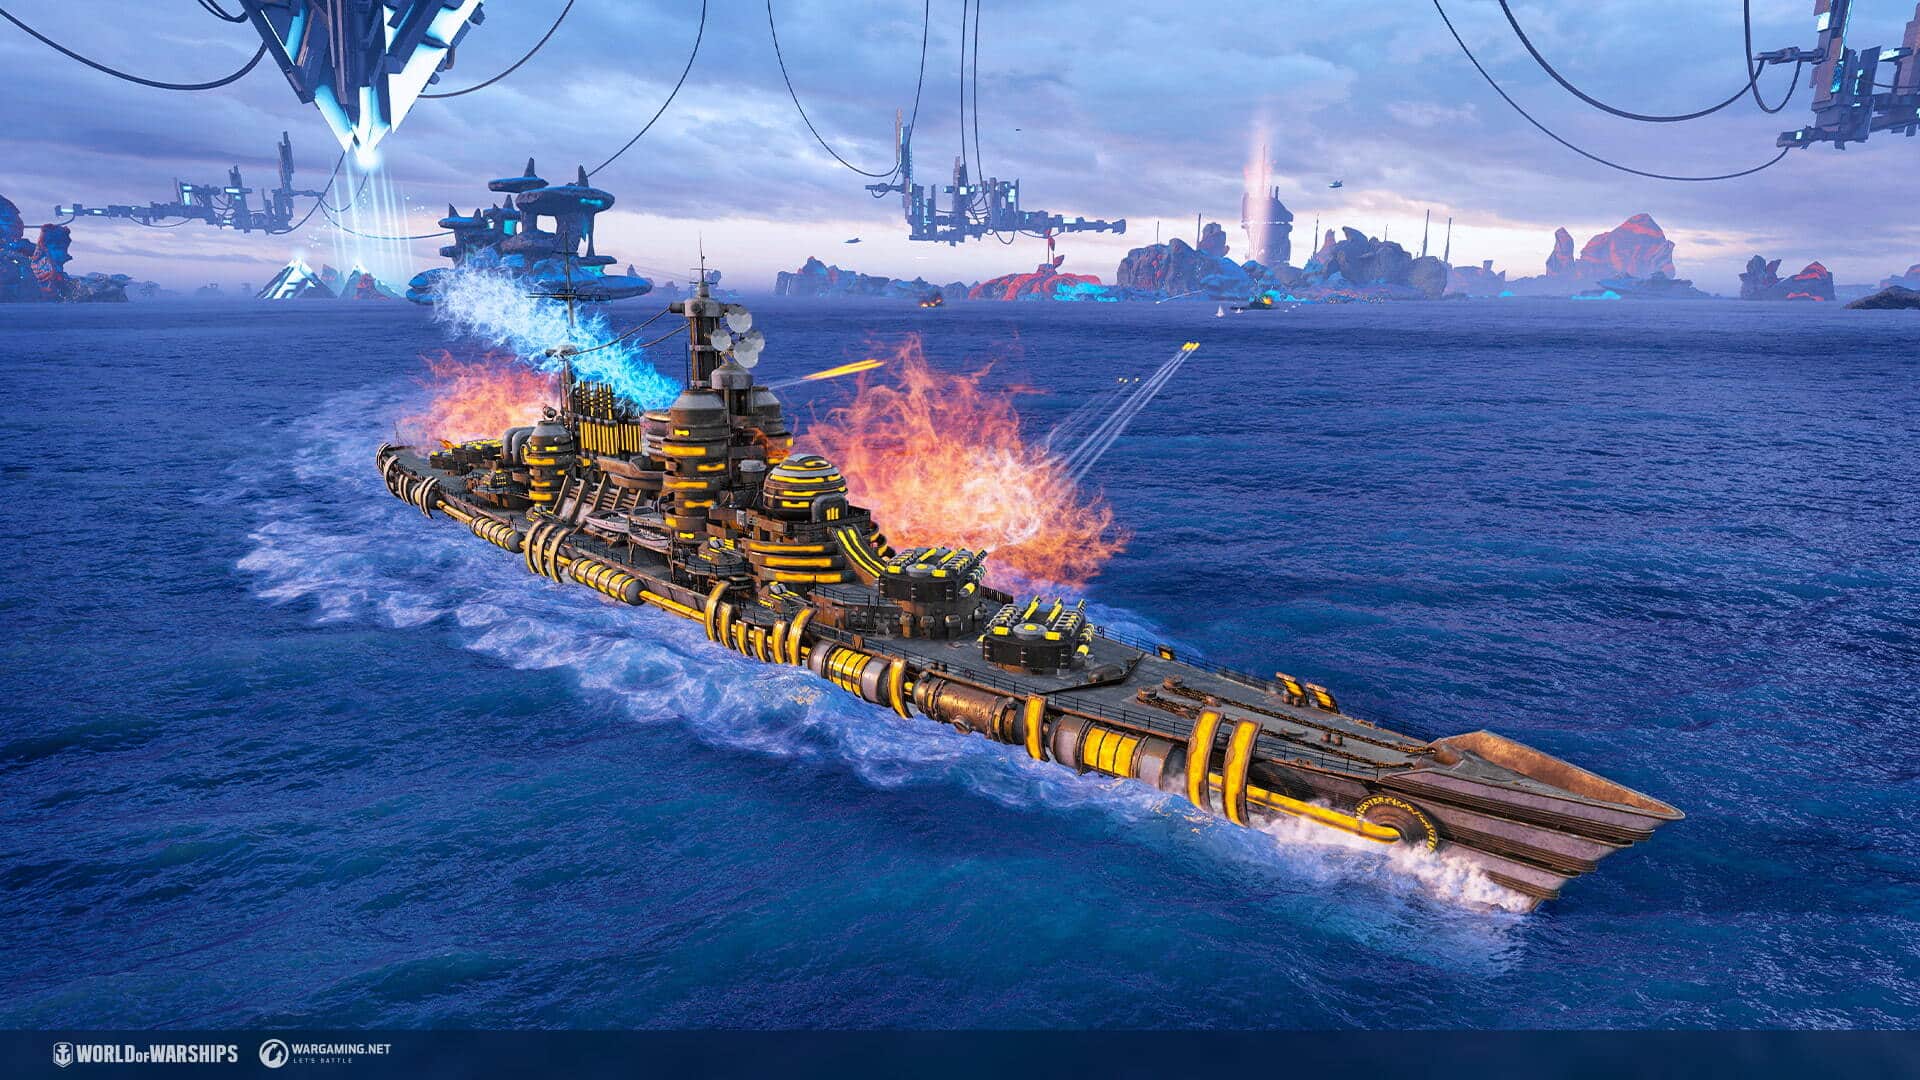 Novos encouraçados alemães chegam a world of warships | 85ca9f55 ww21 | android, ios, mobile, multiplayer, pc, playstation 4, wargaming, world of warships, xbox one | encouraçados alemães notícias